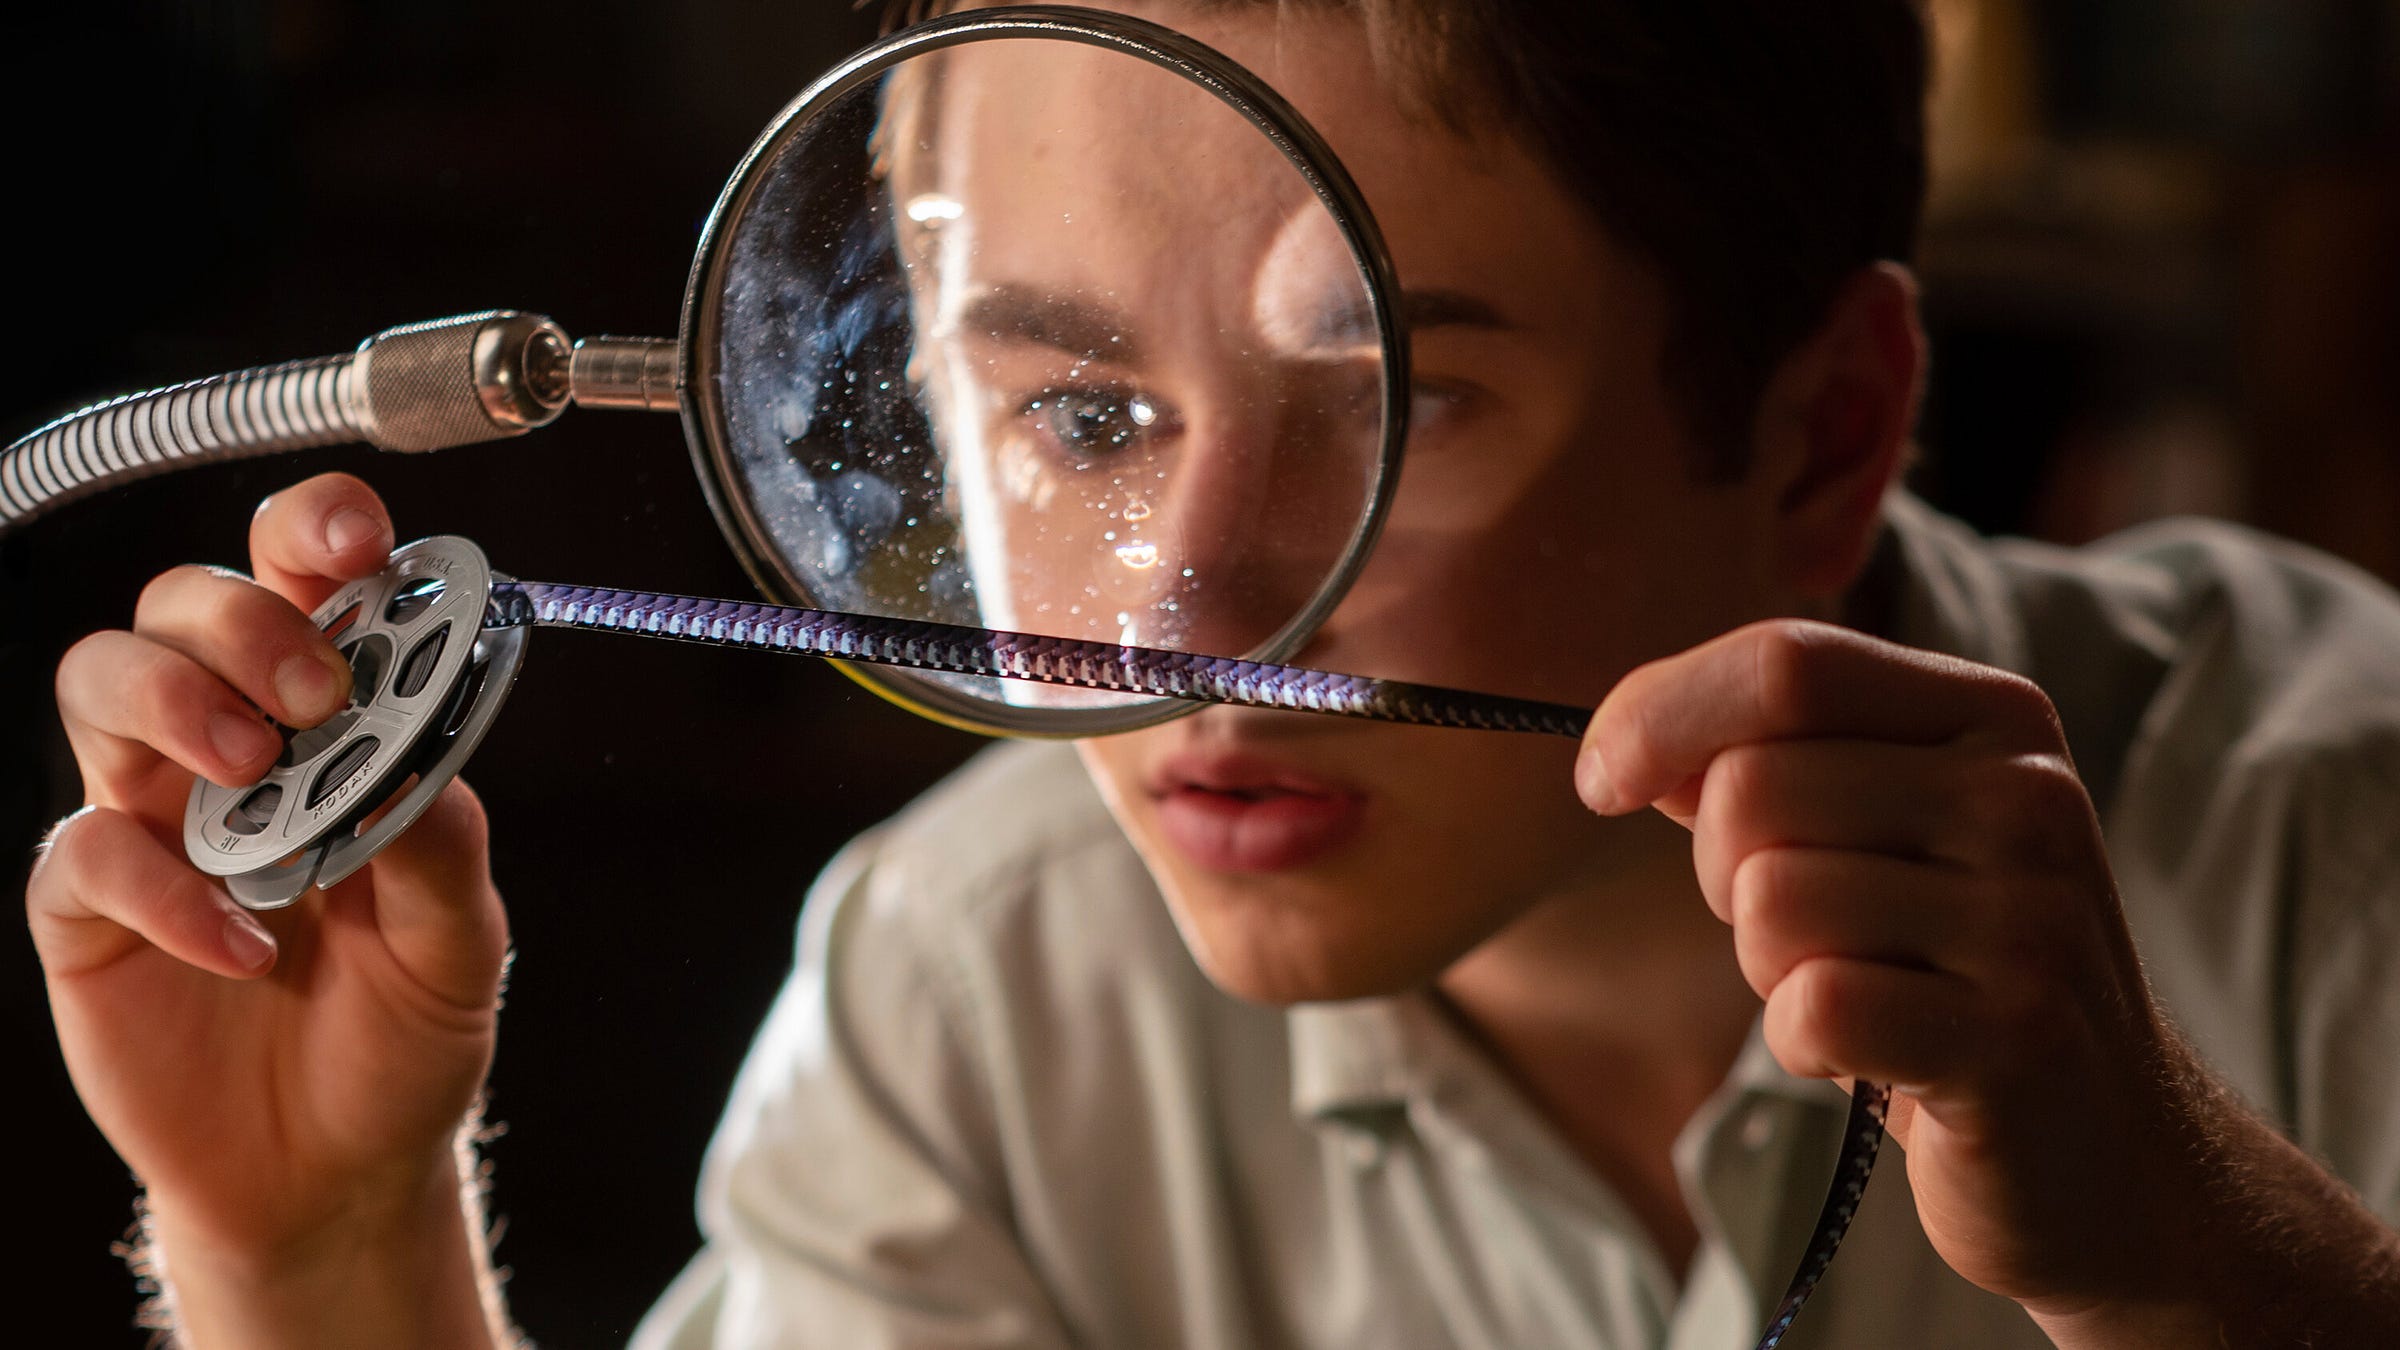 Gabriel Labelle as Samuel Fabelman looks at a reel of film through a magnifying glass.